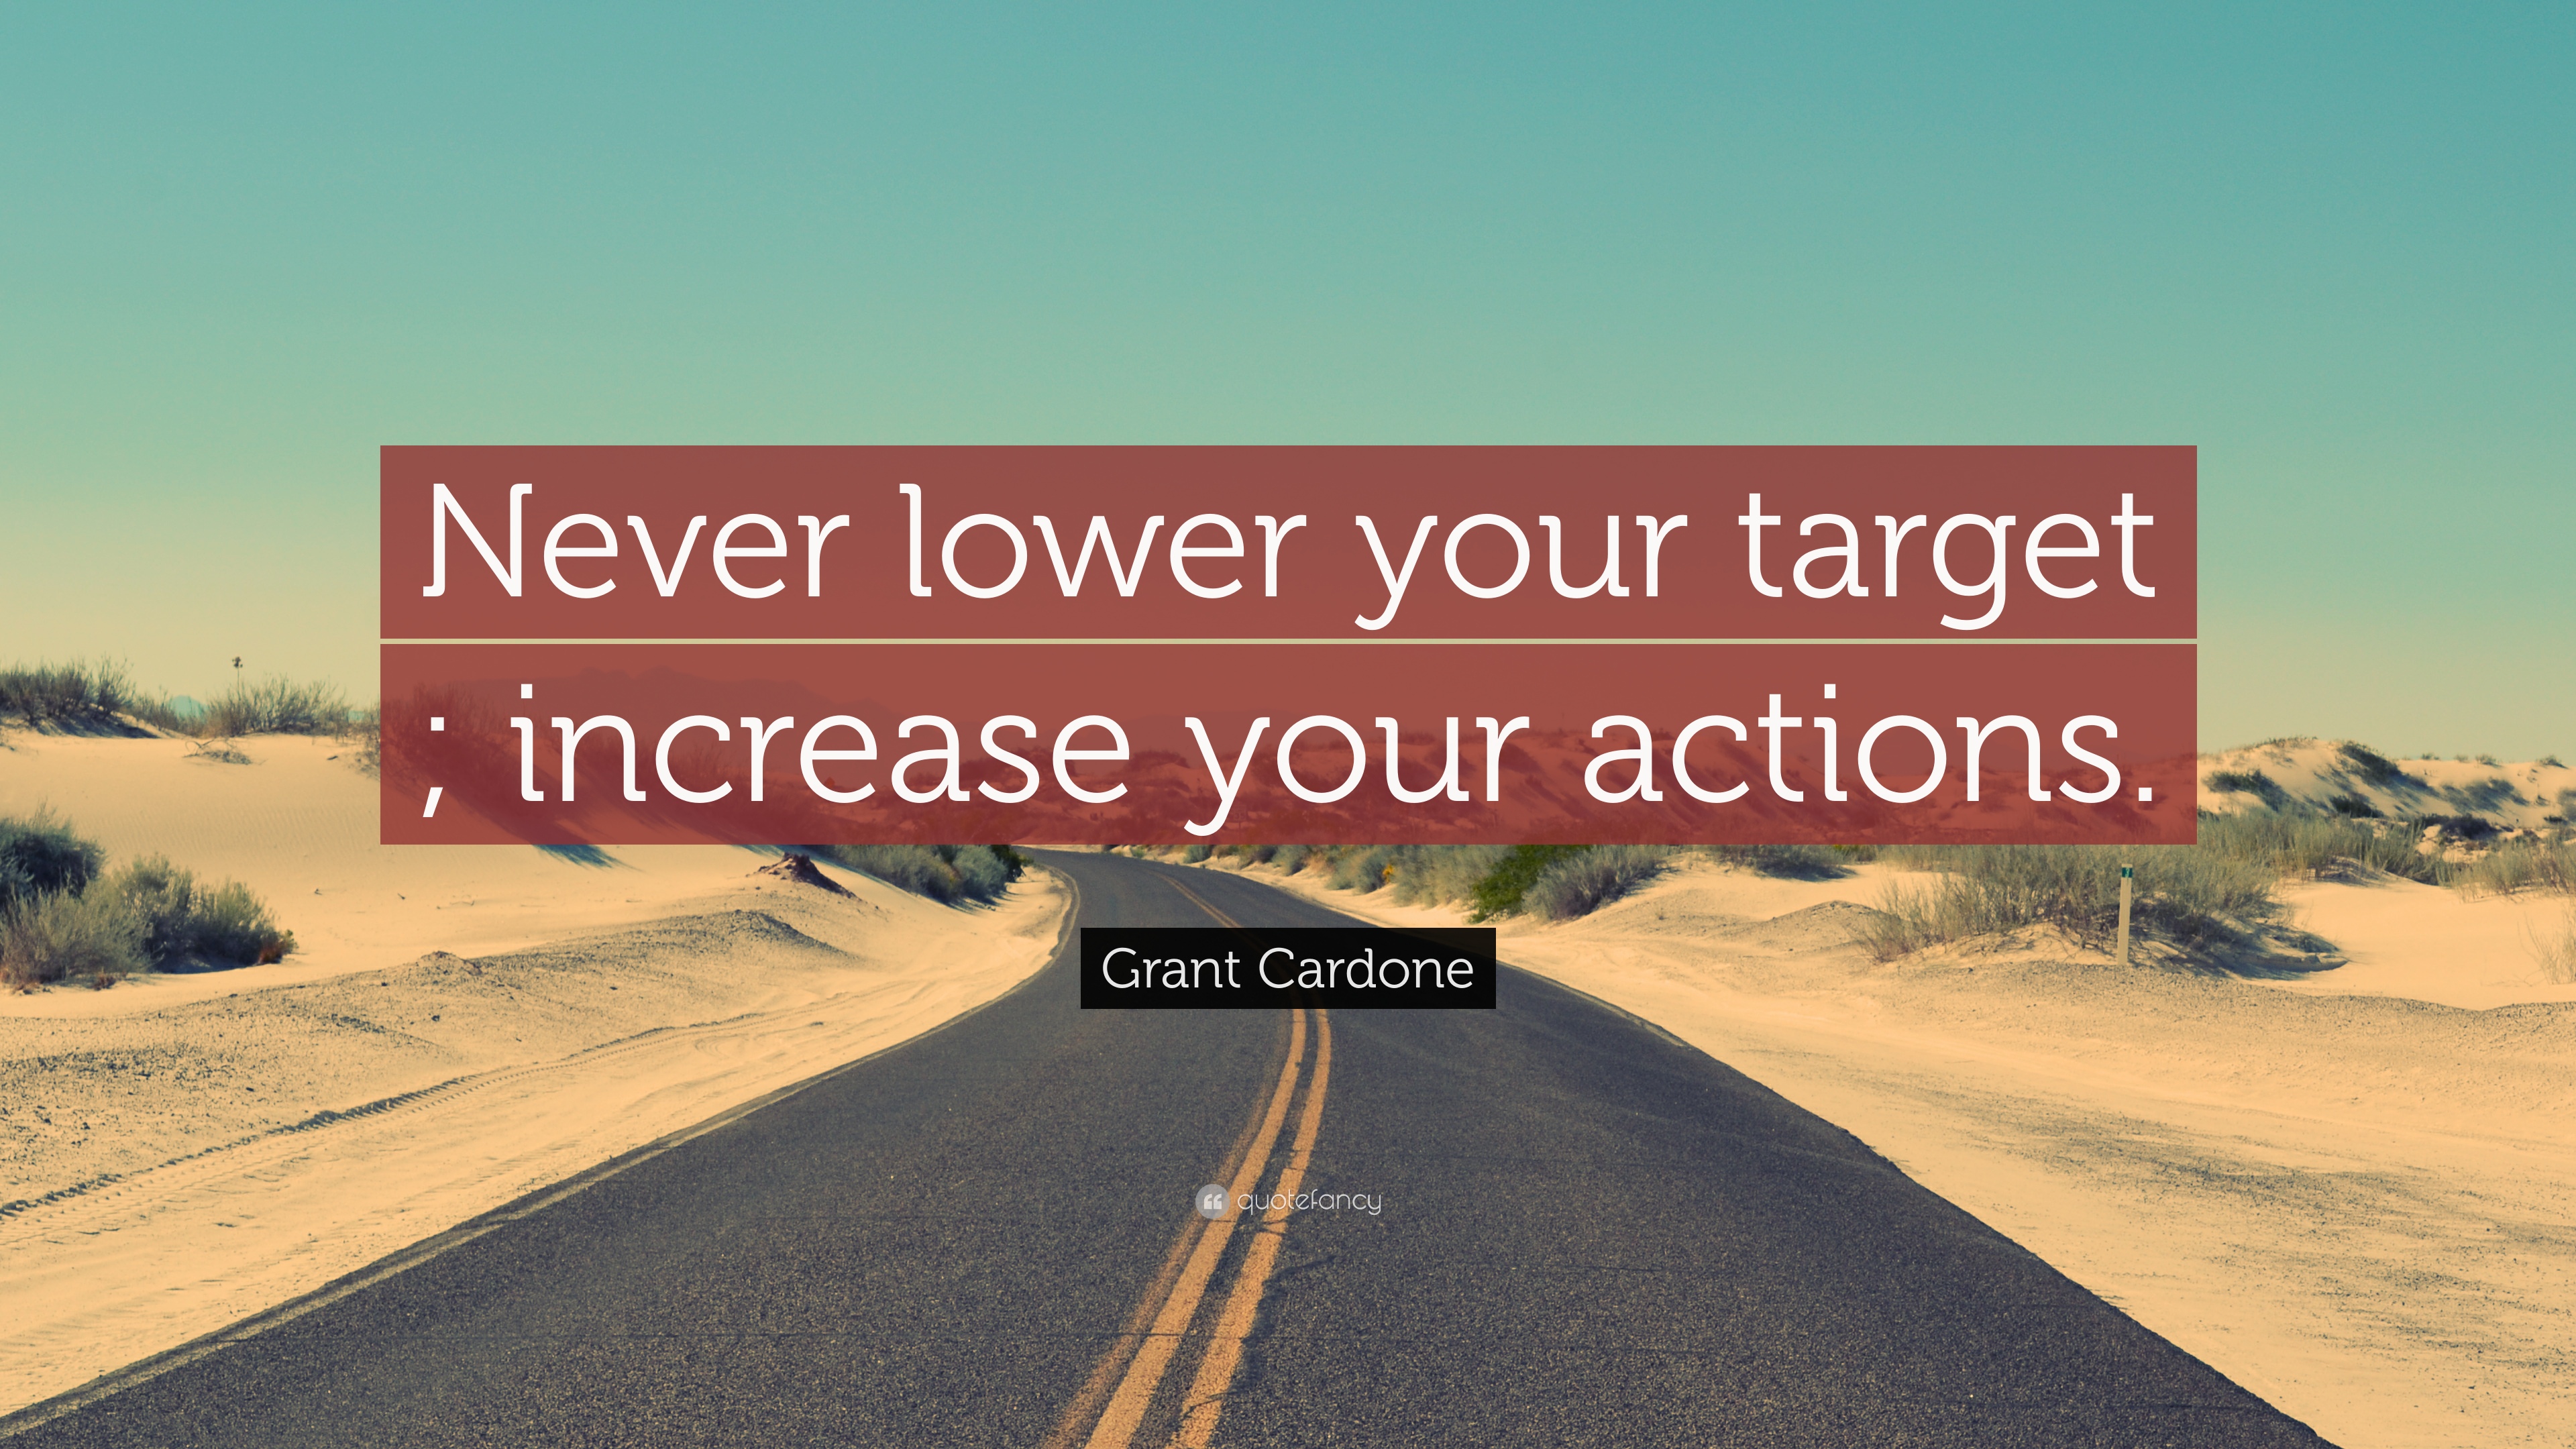 Grant Cardone Quote: “Never lower your target ; increase